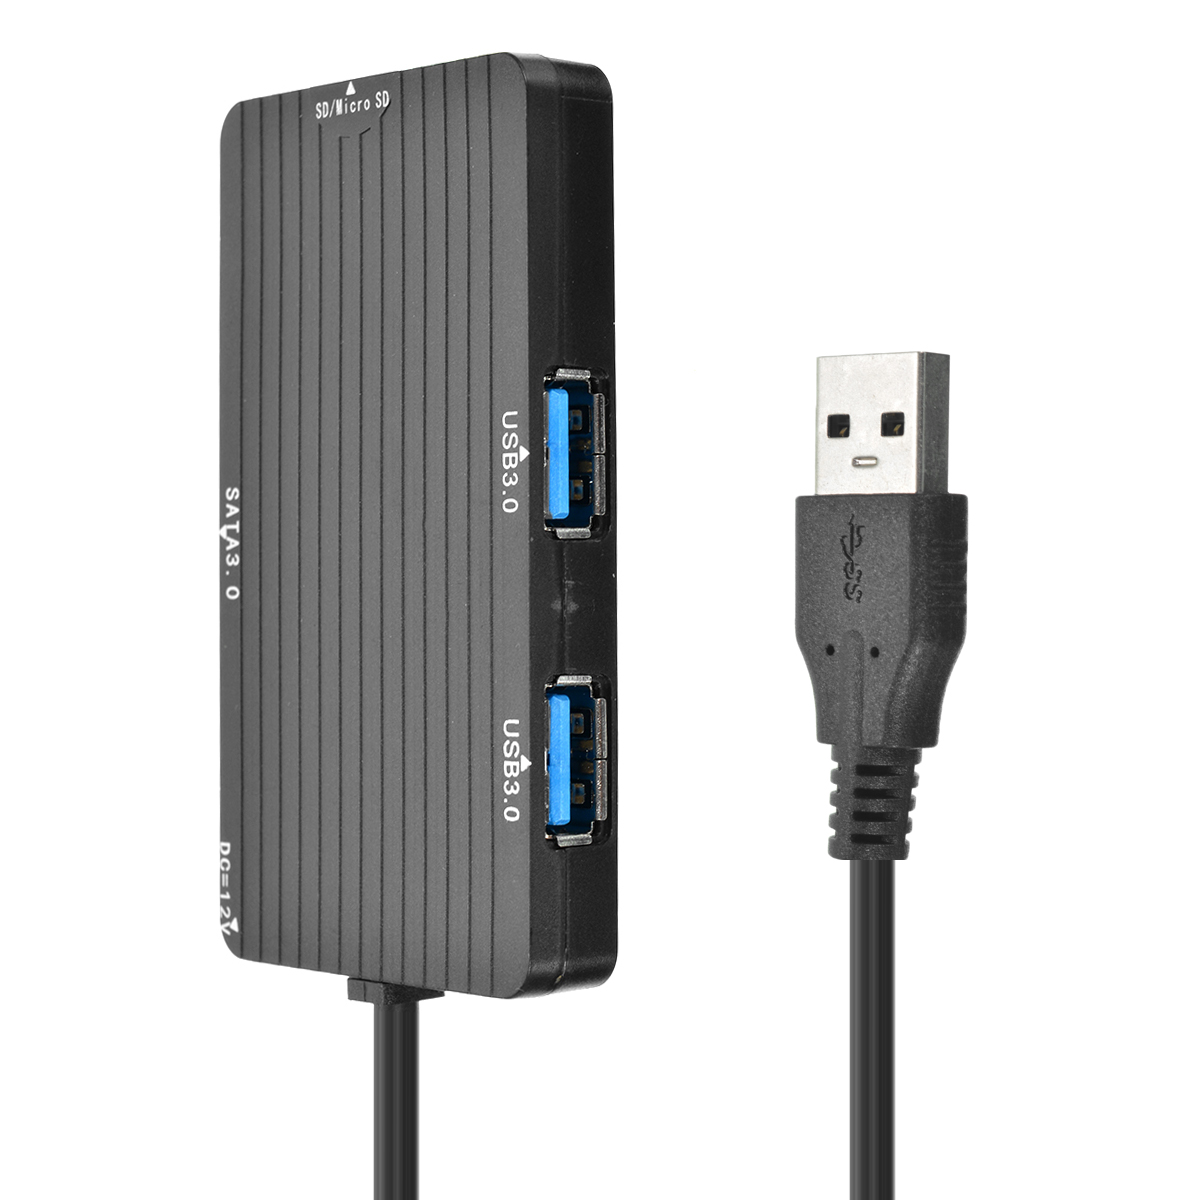 Find ELEGIANT USB3 0/SATA3 0 Converter 2 5 USB3 0 Hard Drive Adapter TF/SD Card Card Reader for Sale on Gipsybee.com with cryptocurrencies